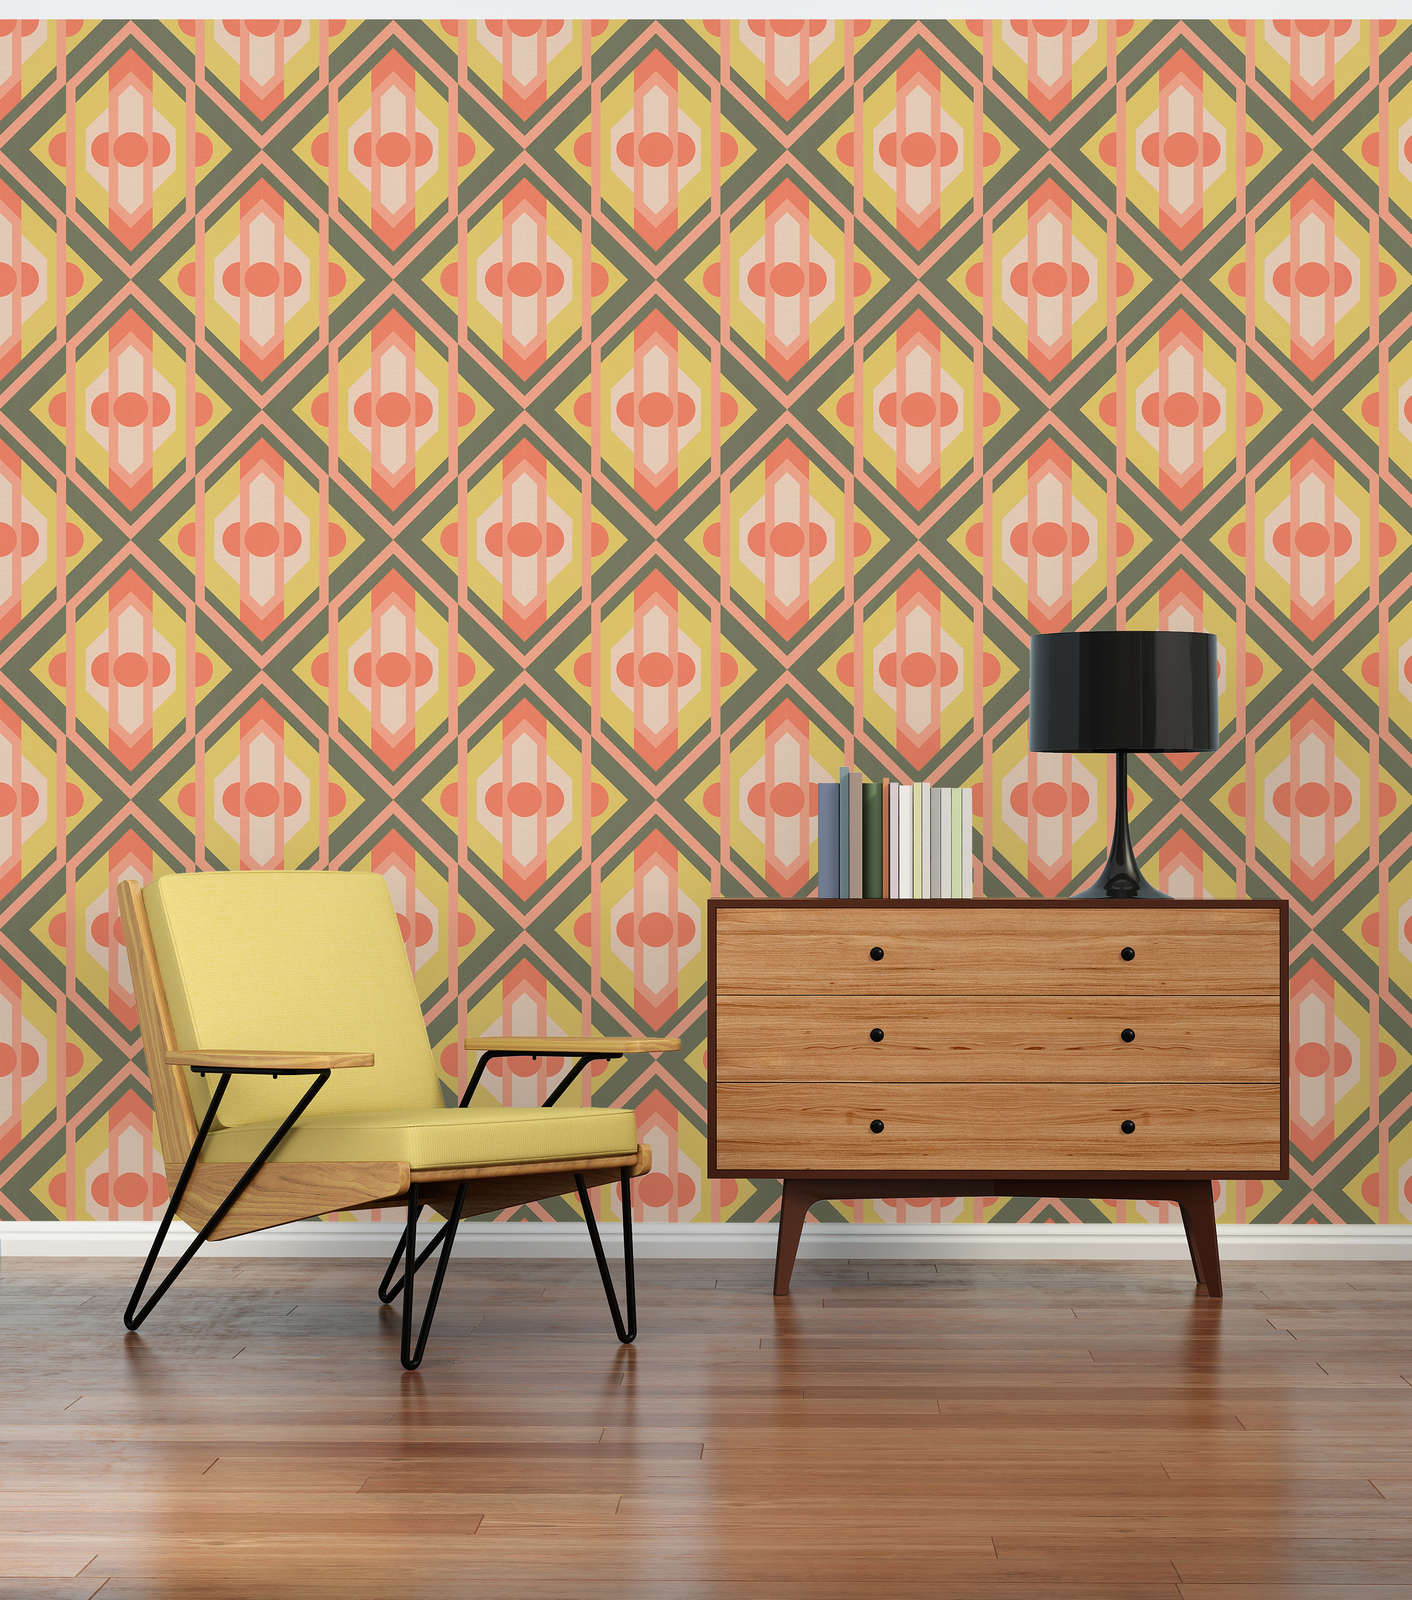             Lightly textured retro wallpaper with geometric ornaments - green, orange, red
        